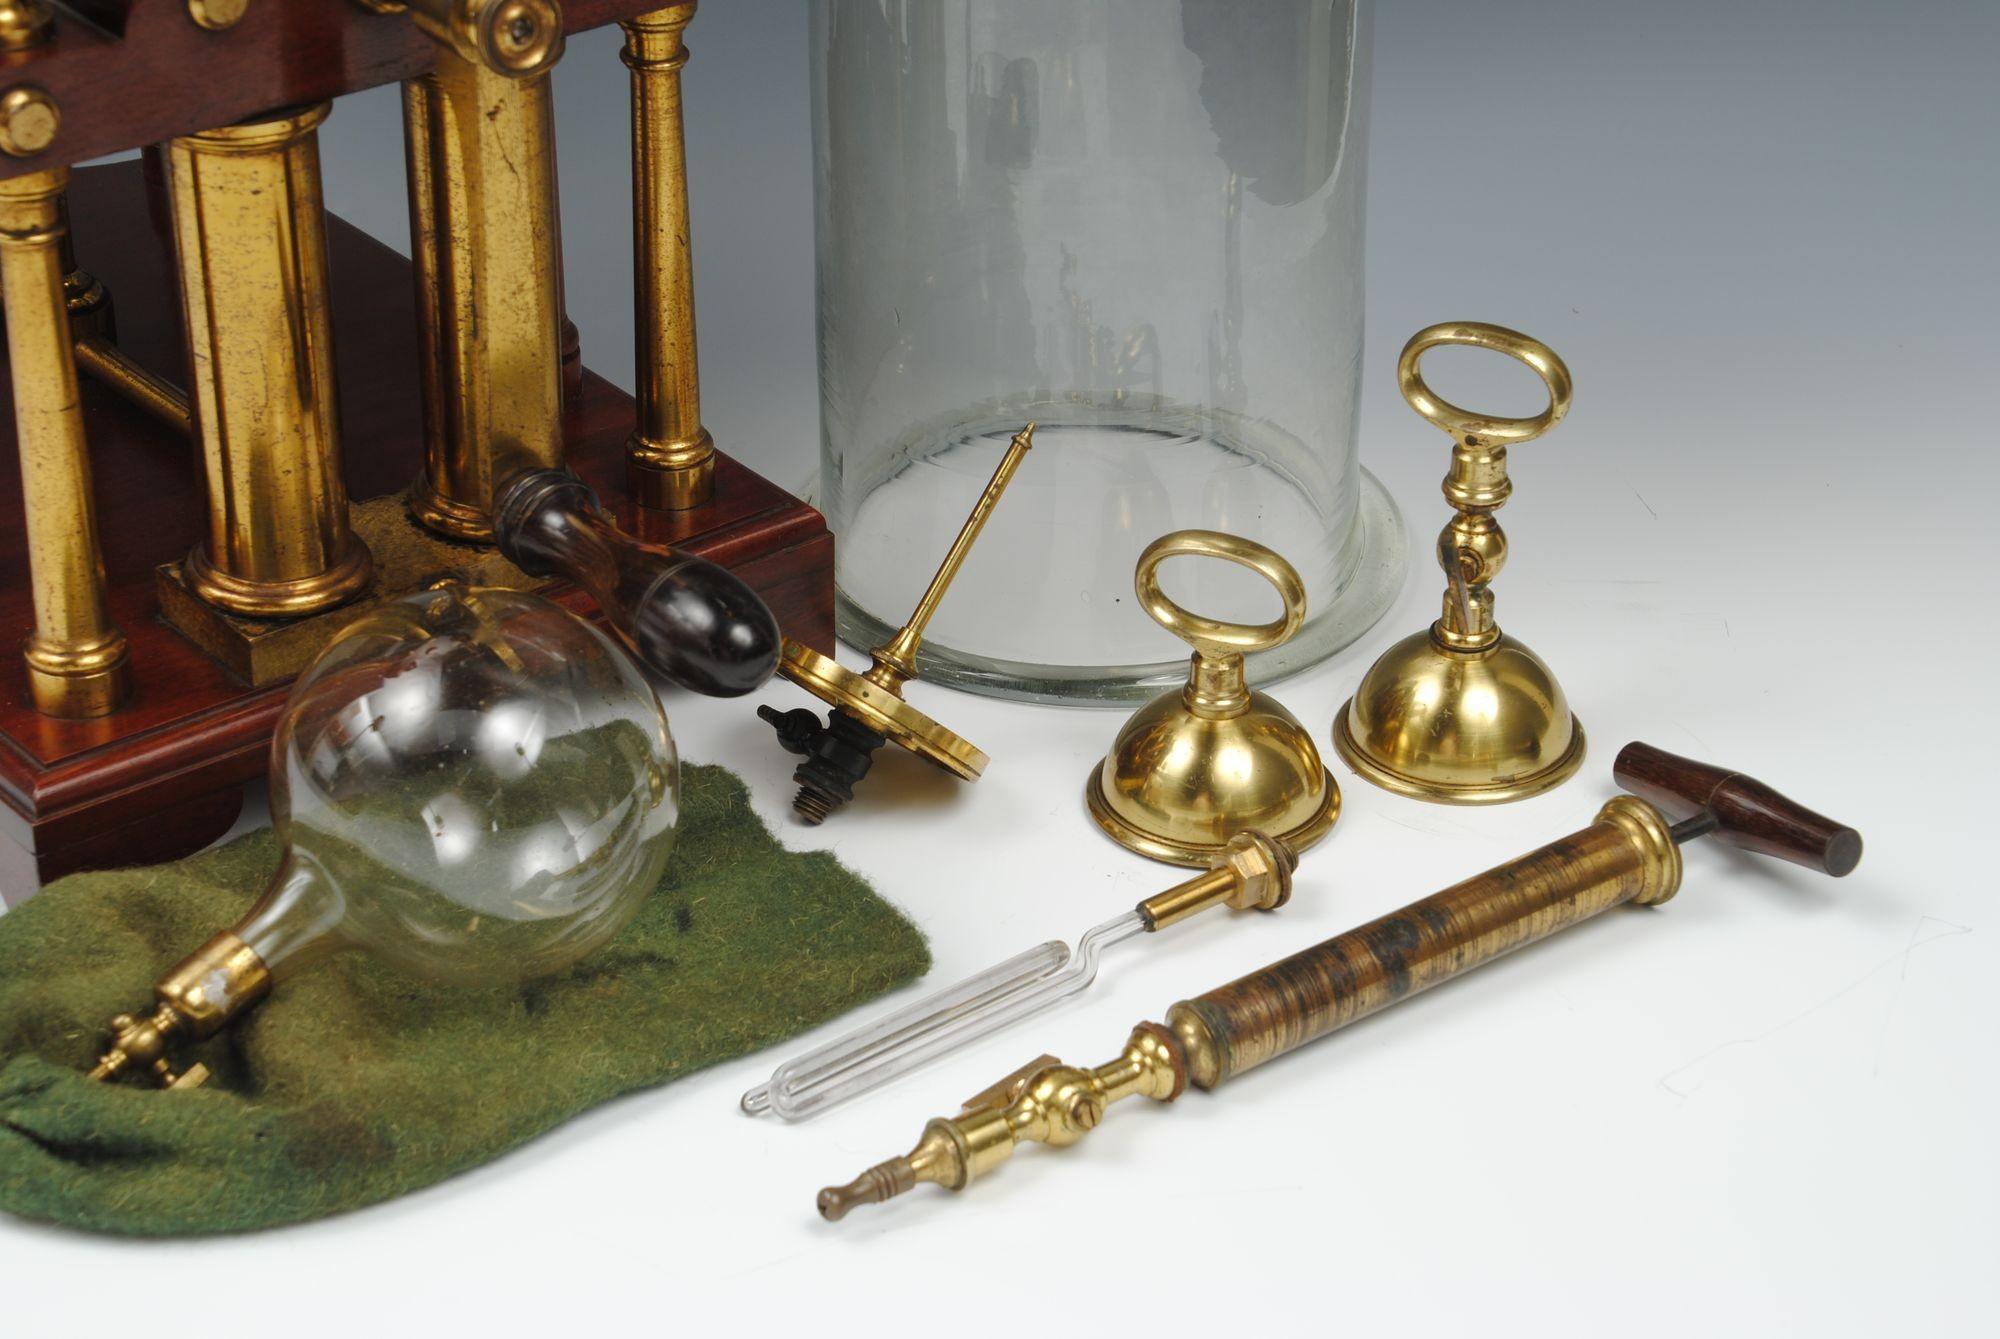 A wonderful example of a double valve demonstration vacuum pump with brass and mahogany columns, decorative finials, and the raised larger plate supported columns, with a smaller one to the rear, signed on the engraved plate by Ladd, Penton place,